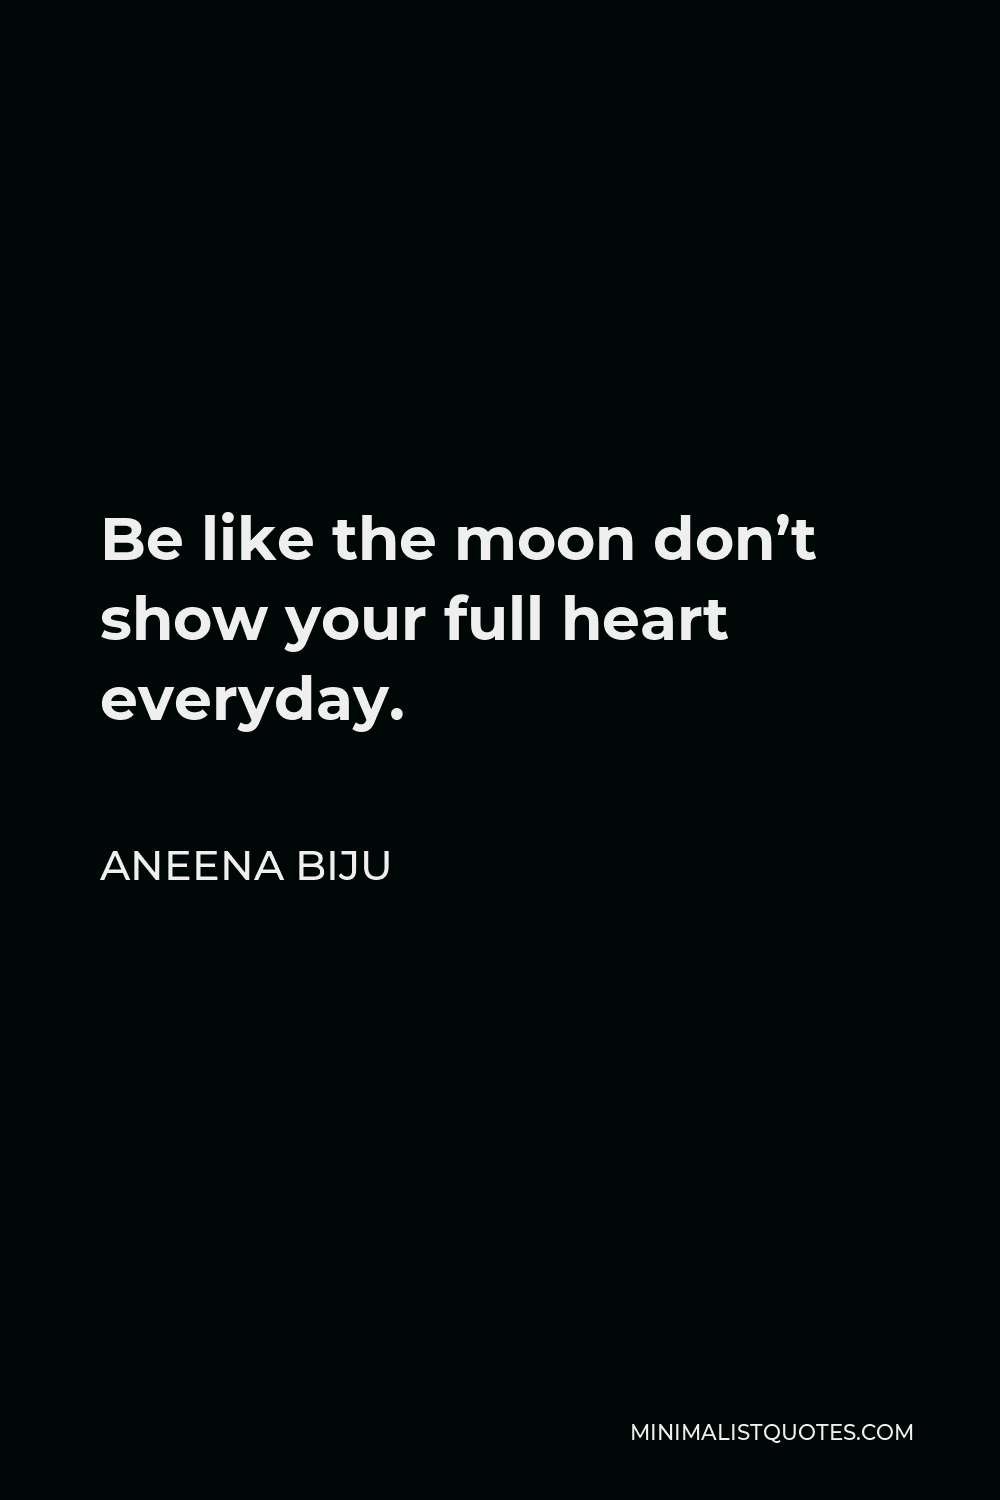 Aneena Biju Quote - Be like the moon don’t show your full heart everyday.